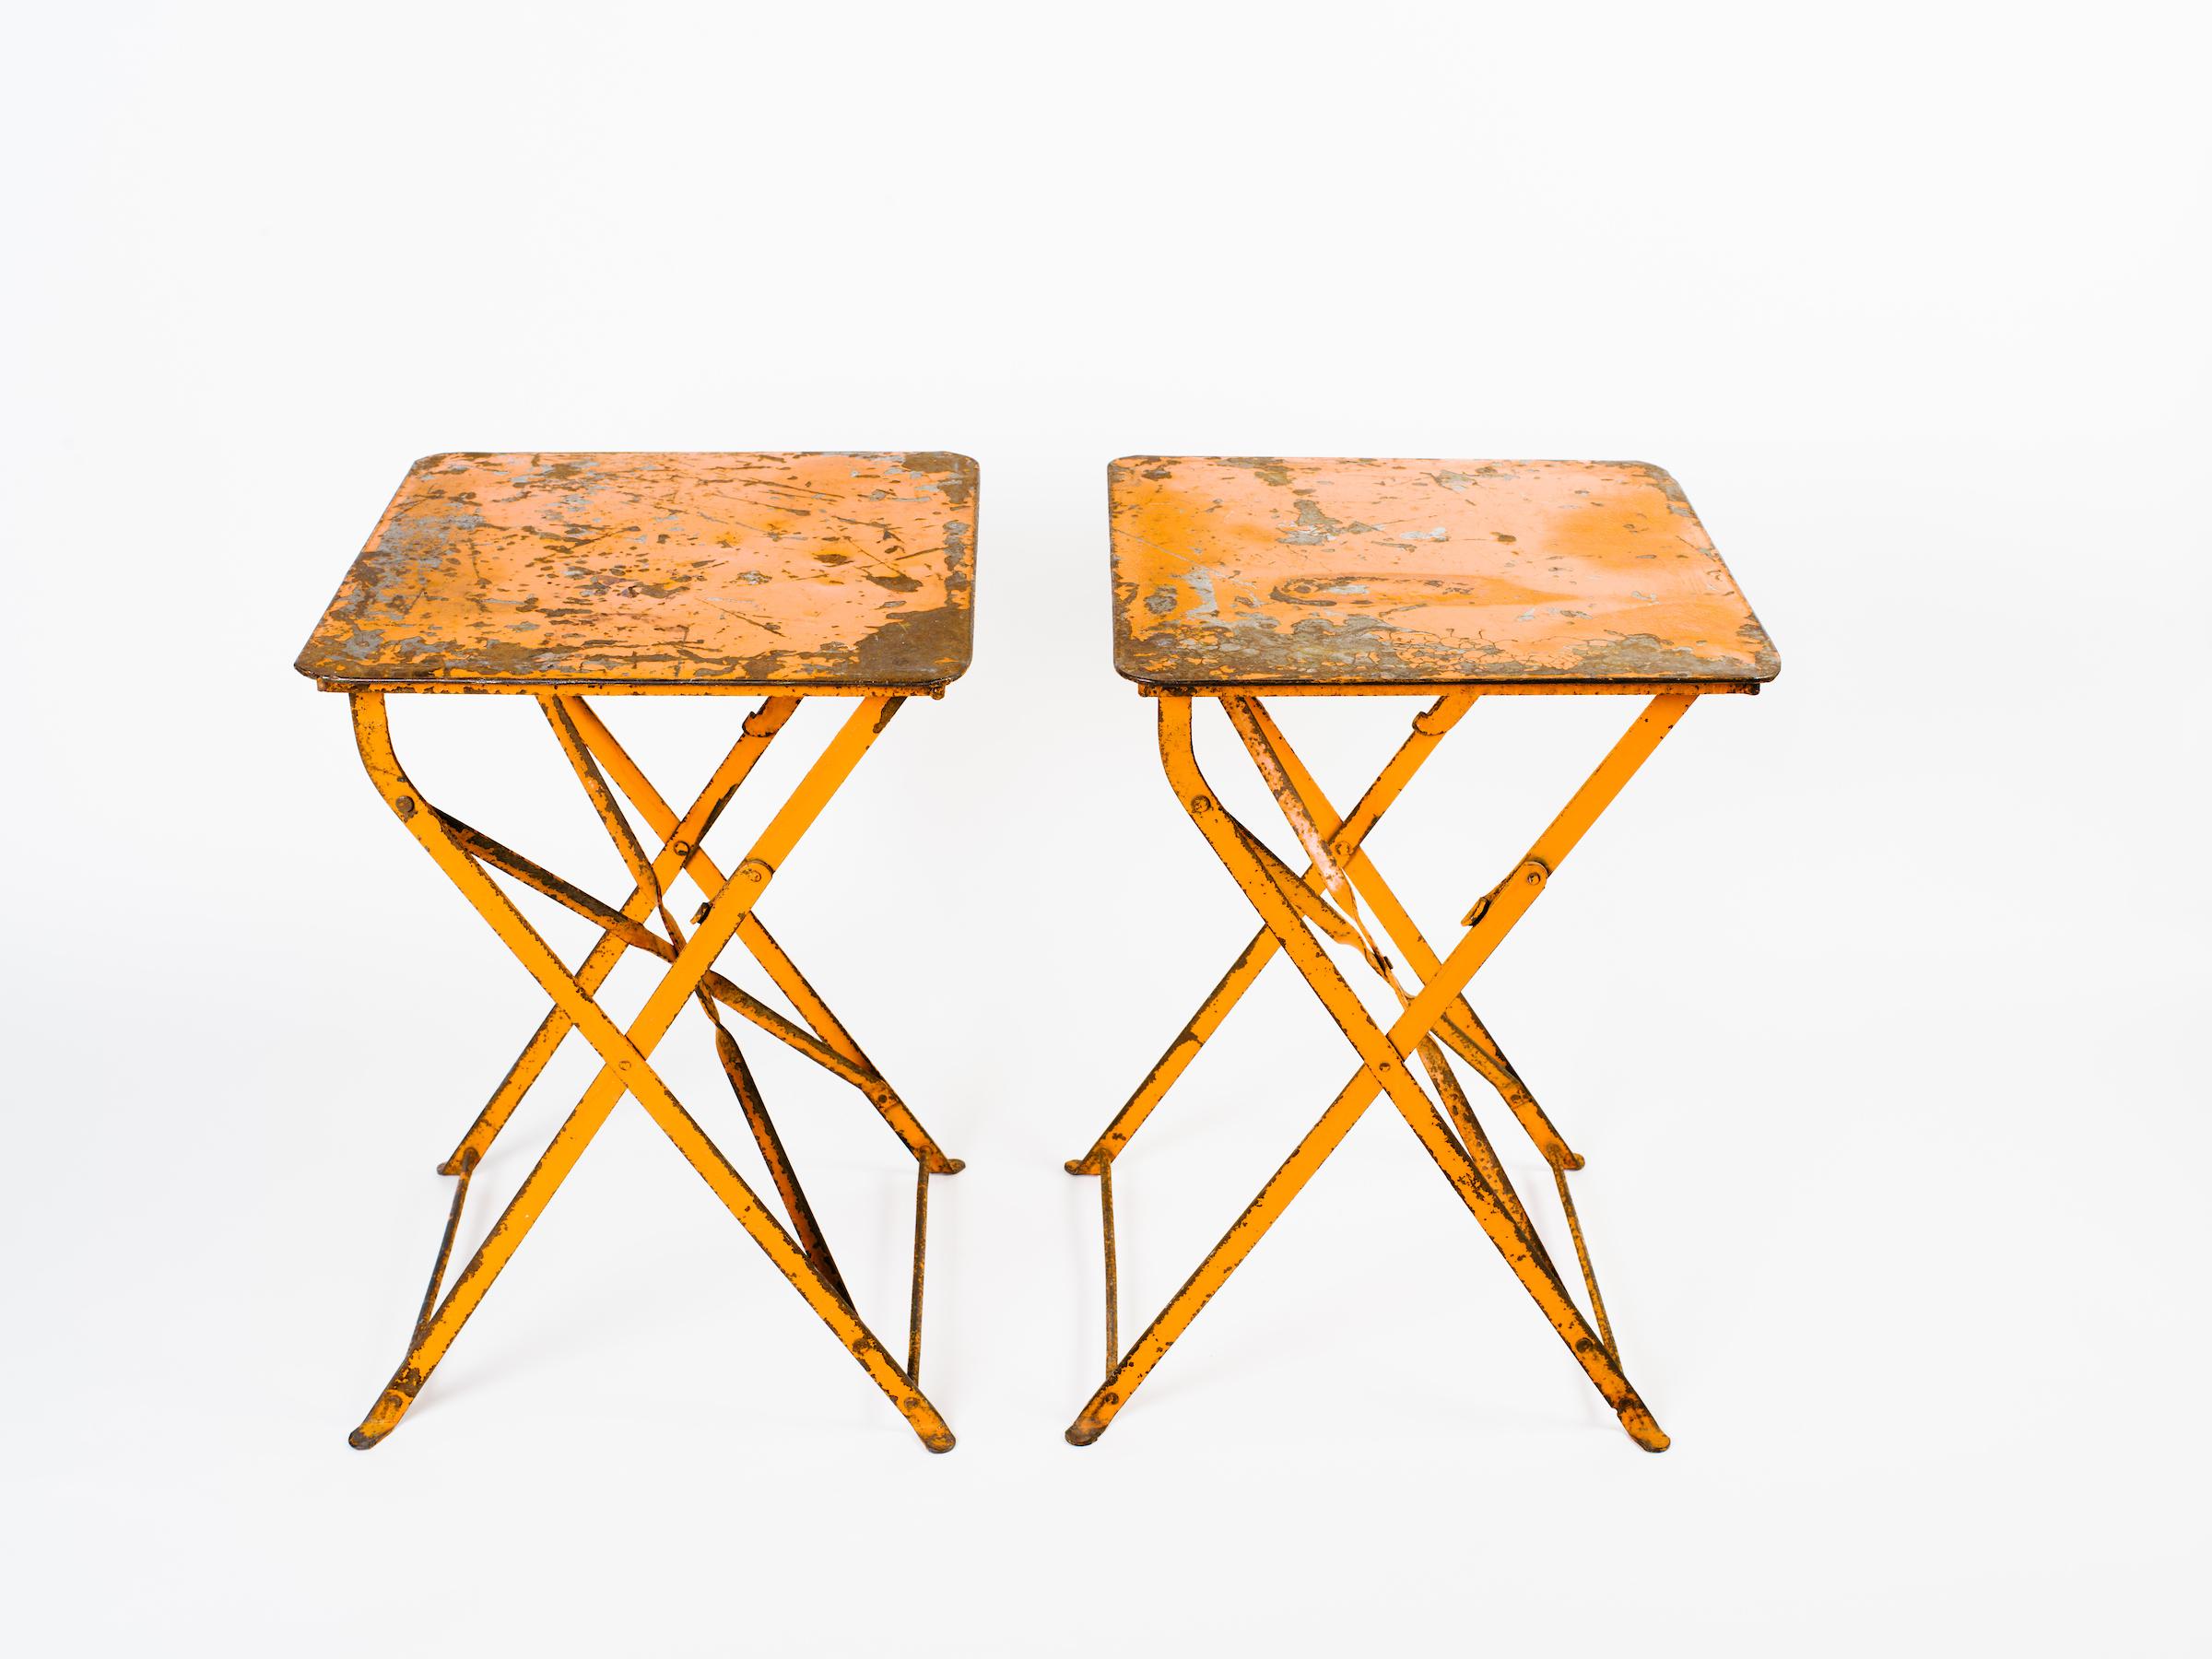 Metal Pair of French Antique Iron Folding Garden Tables in Distressed Orange, c 1930's